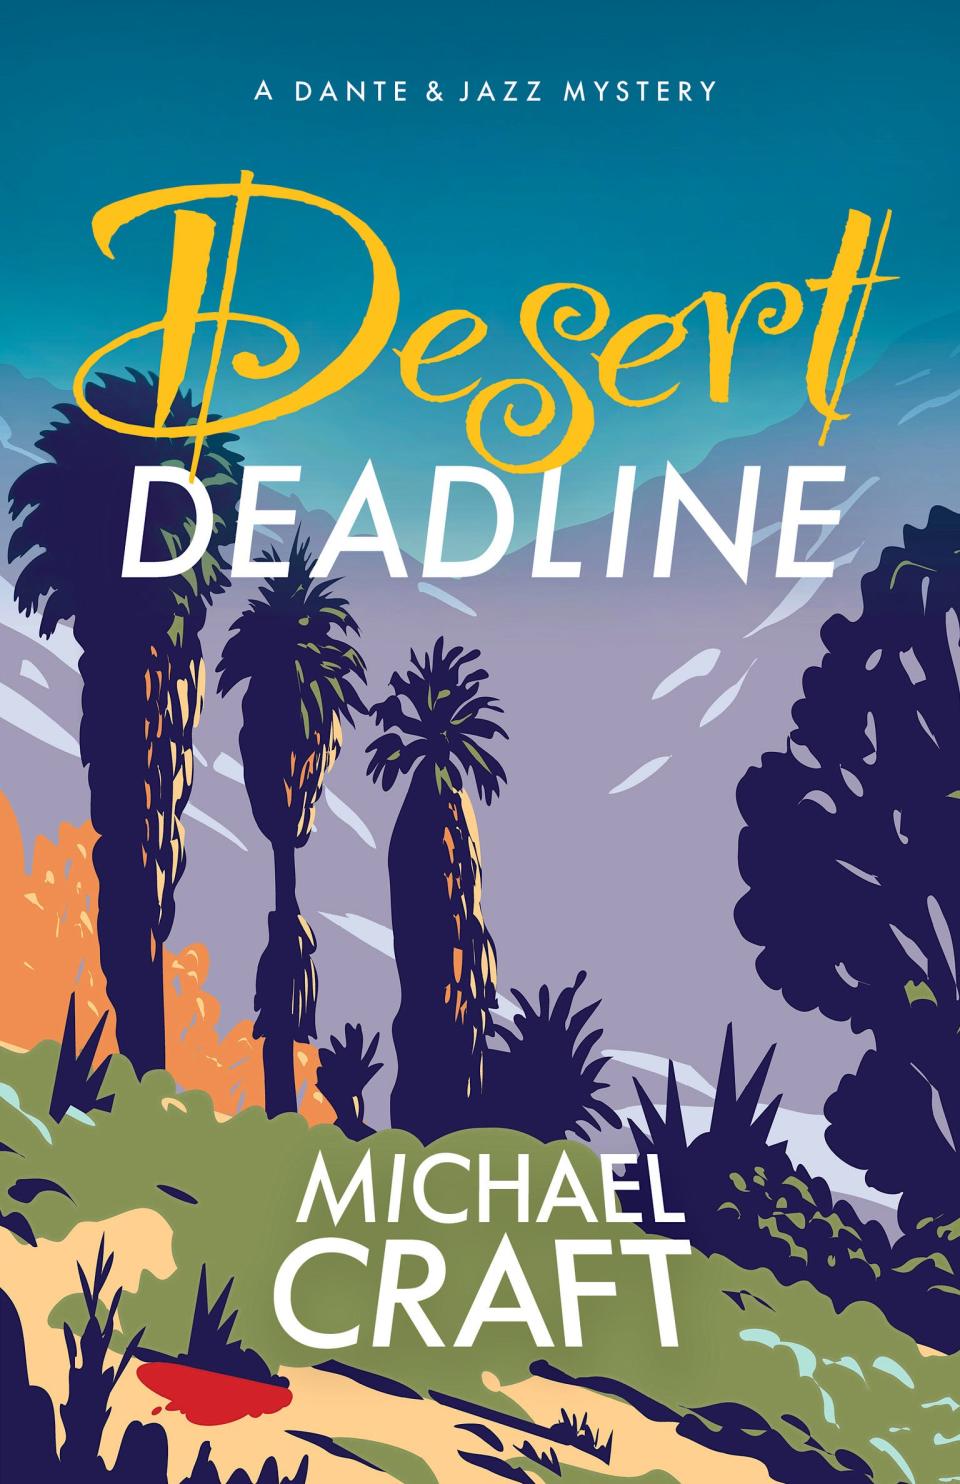 "Desert Deadline: A Dante & Jazz Mystery" is the latest book by Rancho Mirage author Michael Craft.